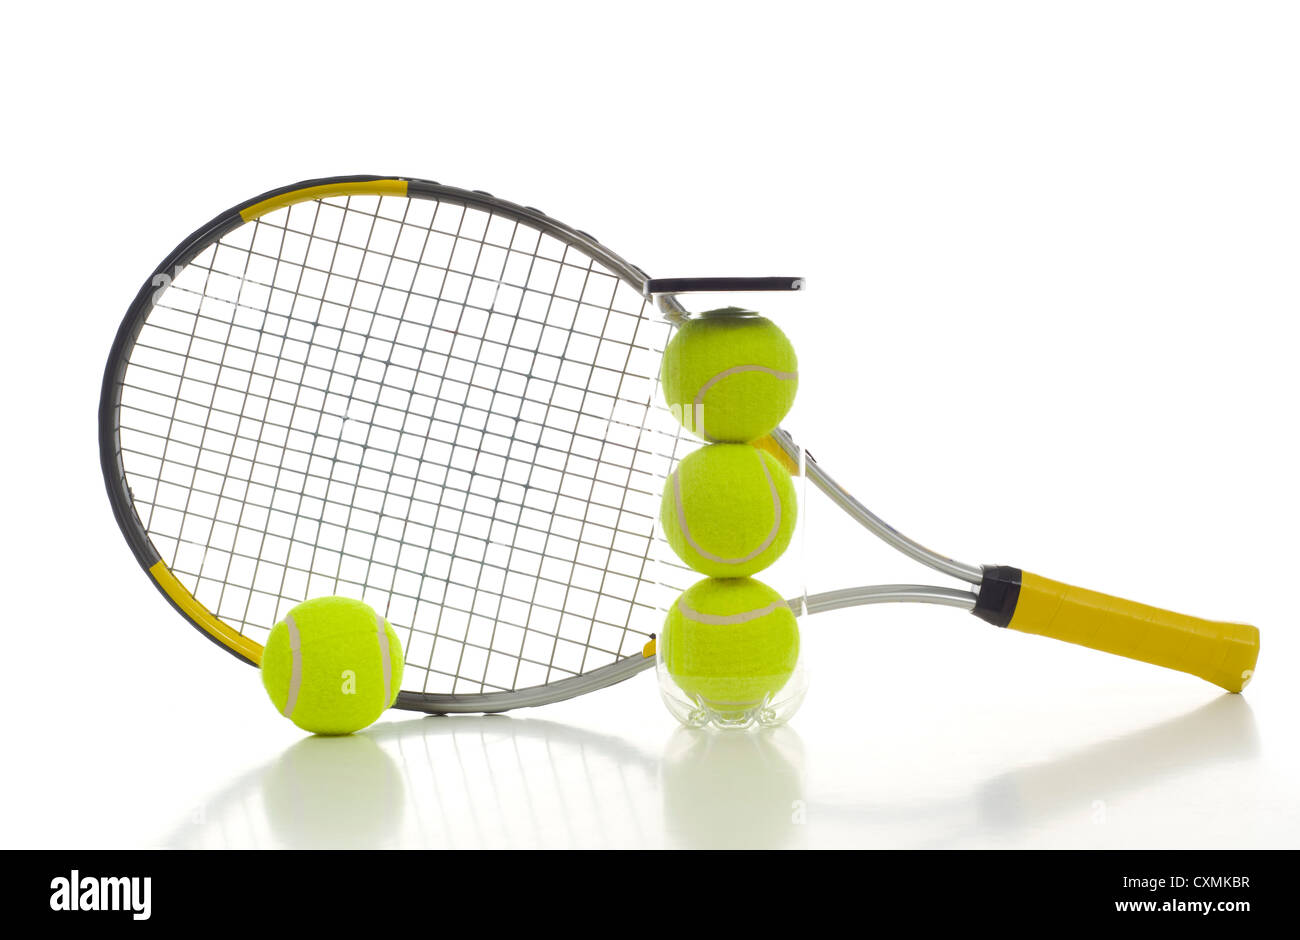 New tennis ball and a tennis racket on white background with copy space Stock Photo